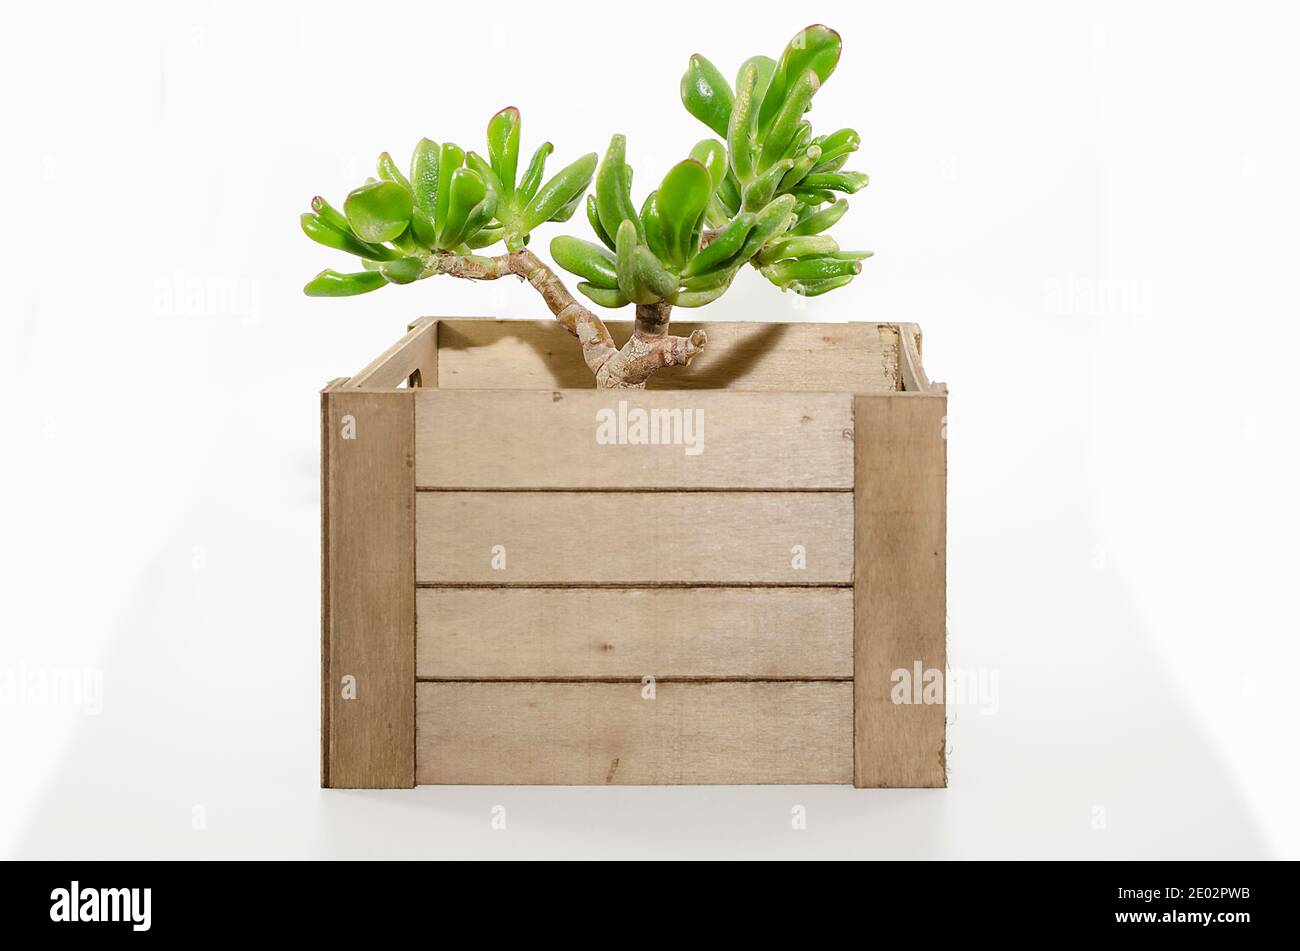 Crassula ovata gollum or hobbit. Cutting of a succulent plant on a wooden box.  Home decoration. Houseplant. Selective focus on the leaves in the back Stock Photo